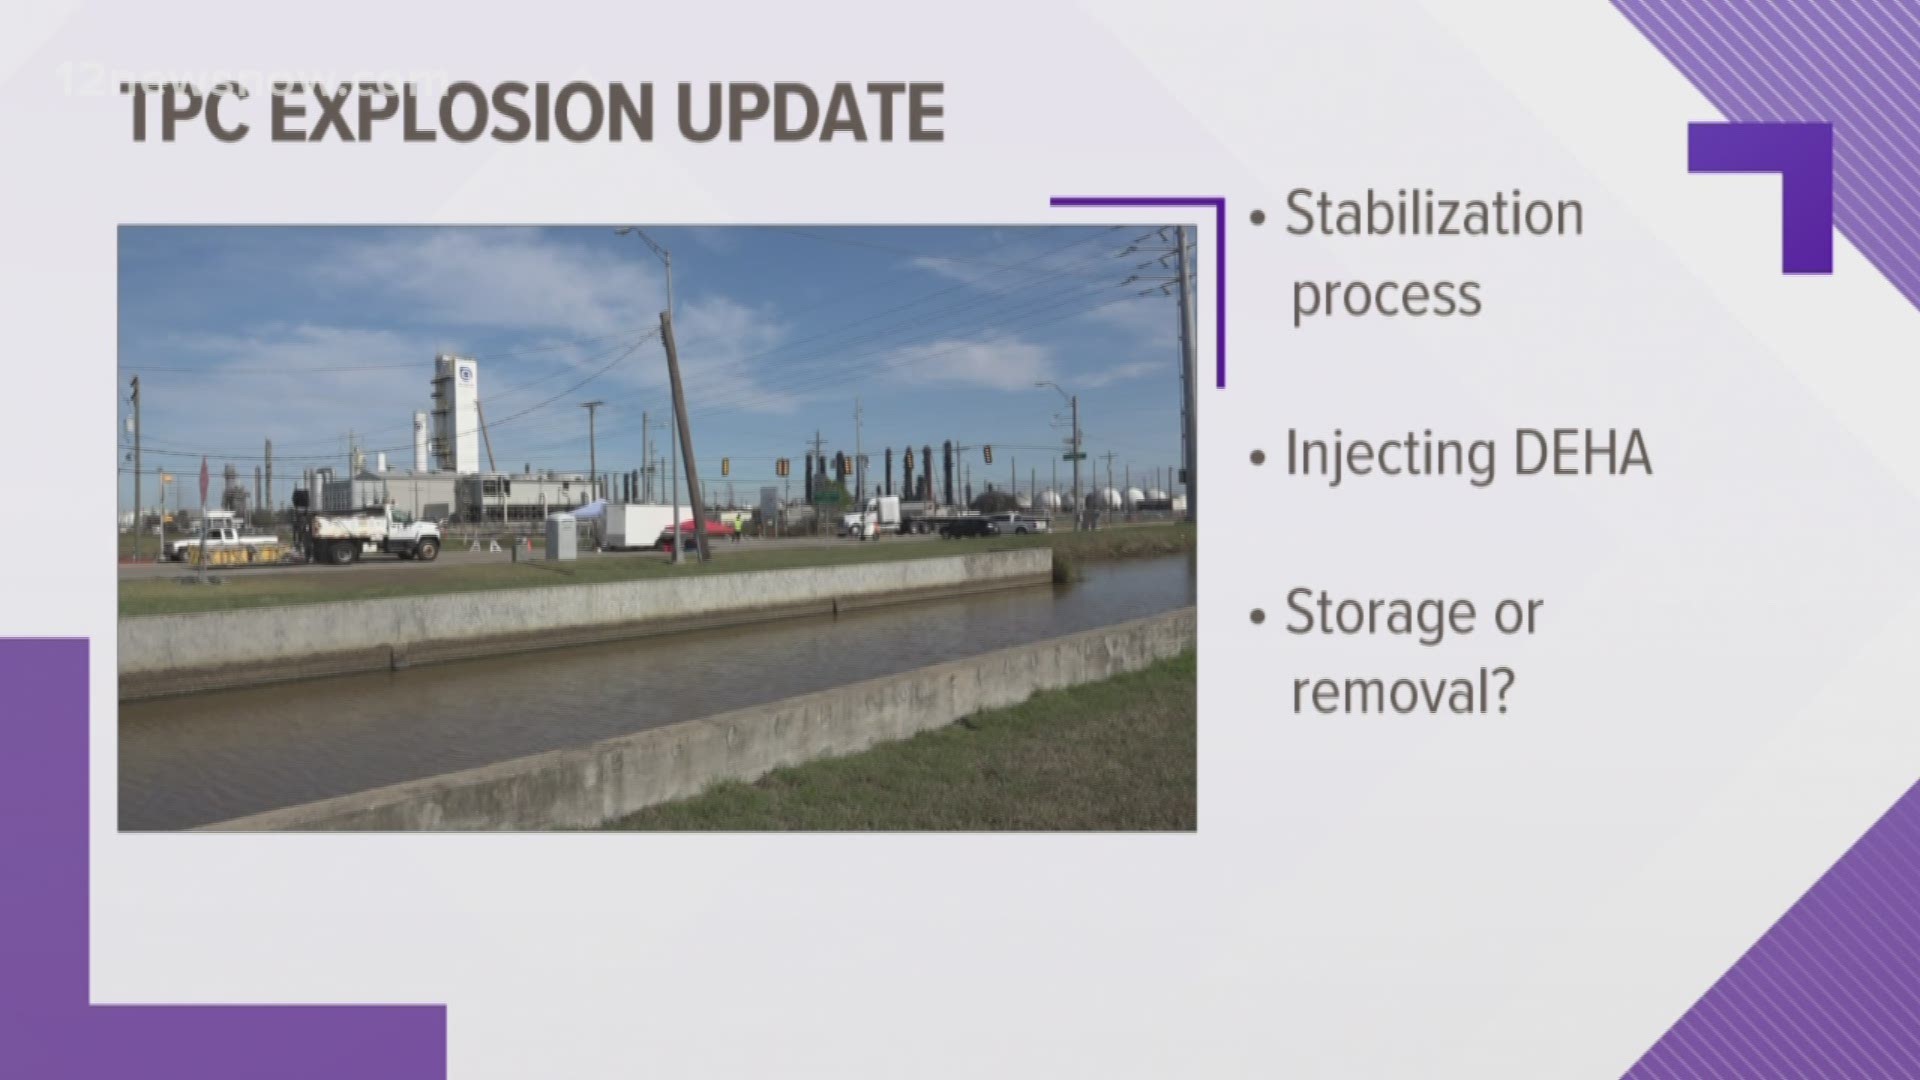 The company says it has rail, barge and pipeline capability to get the material out of the facility